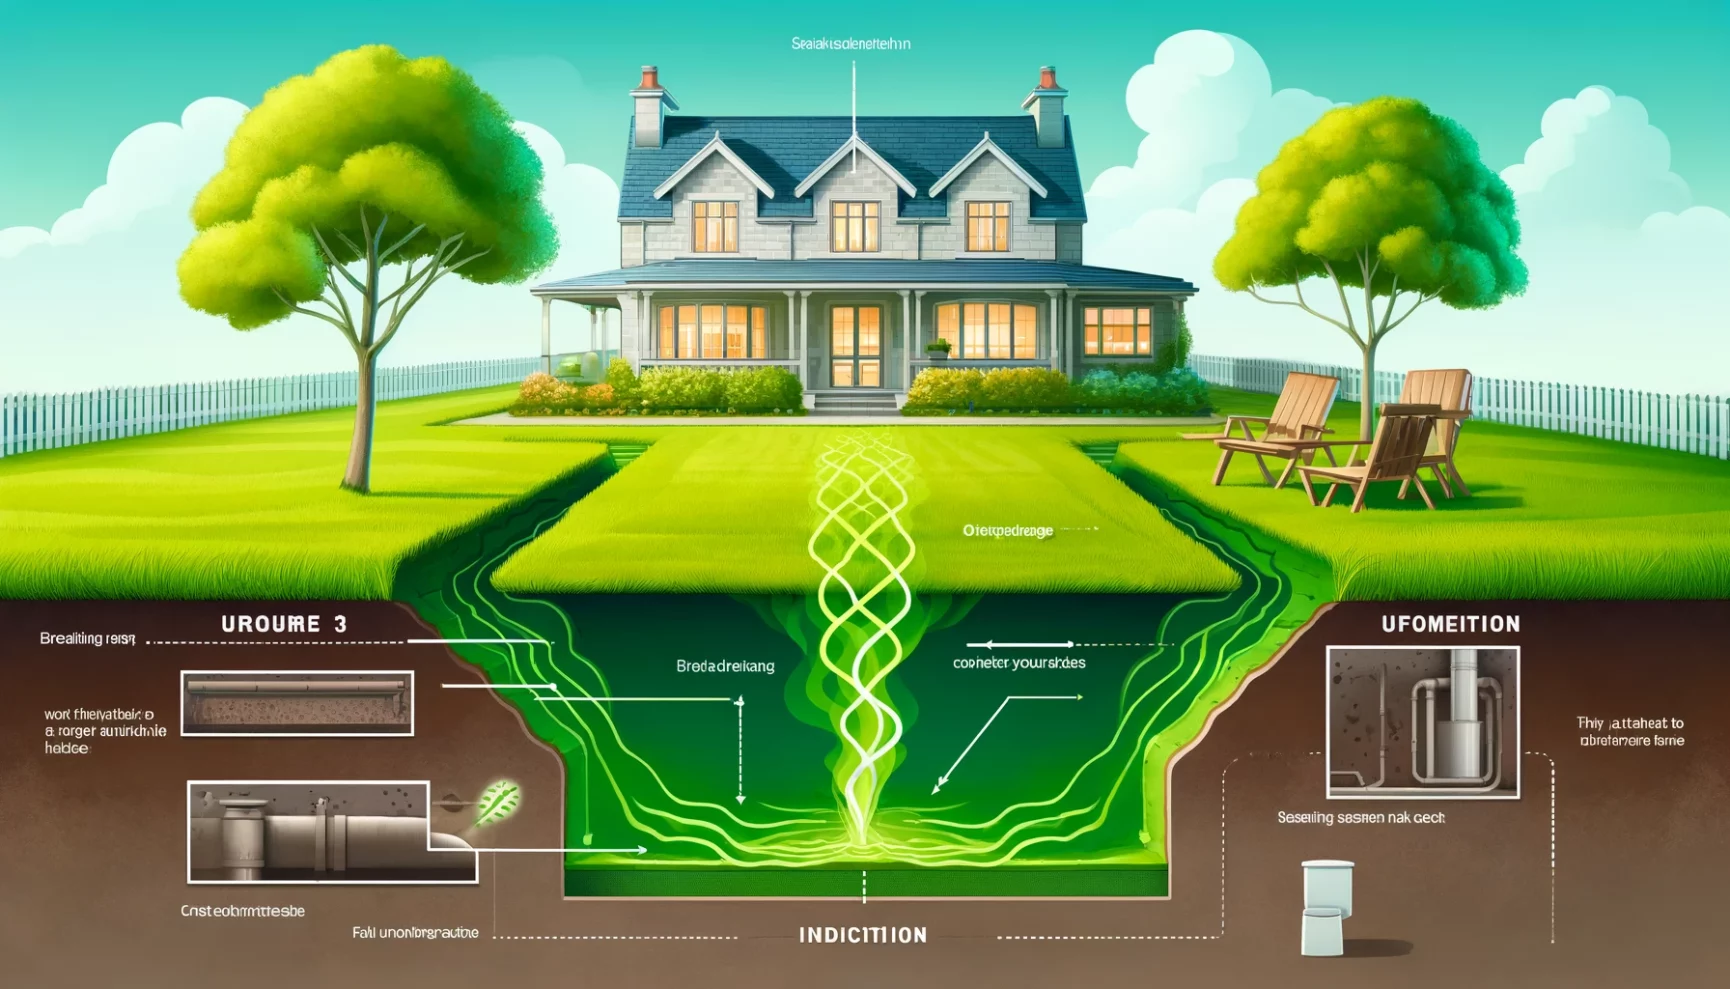 Illustration of a house with a cross-section view showing geothermal heating and cooling processes.